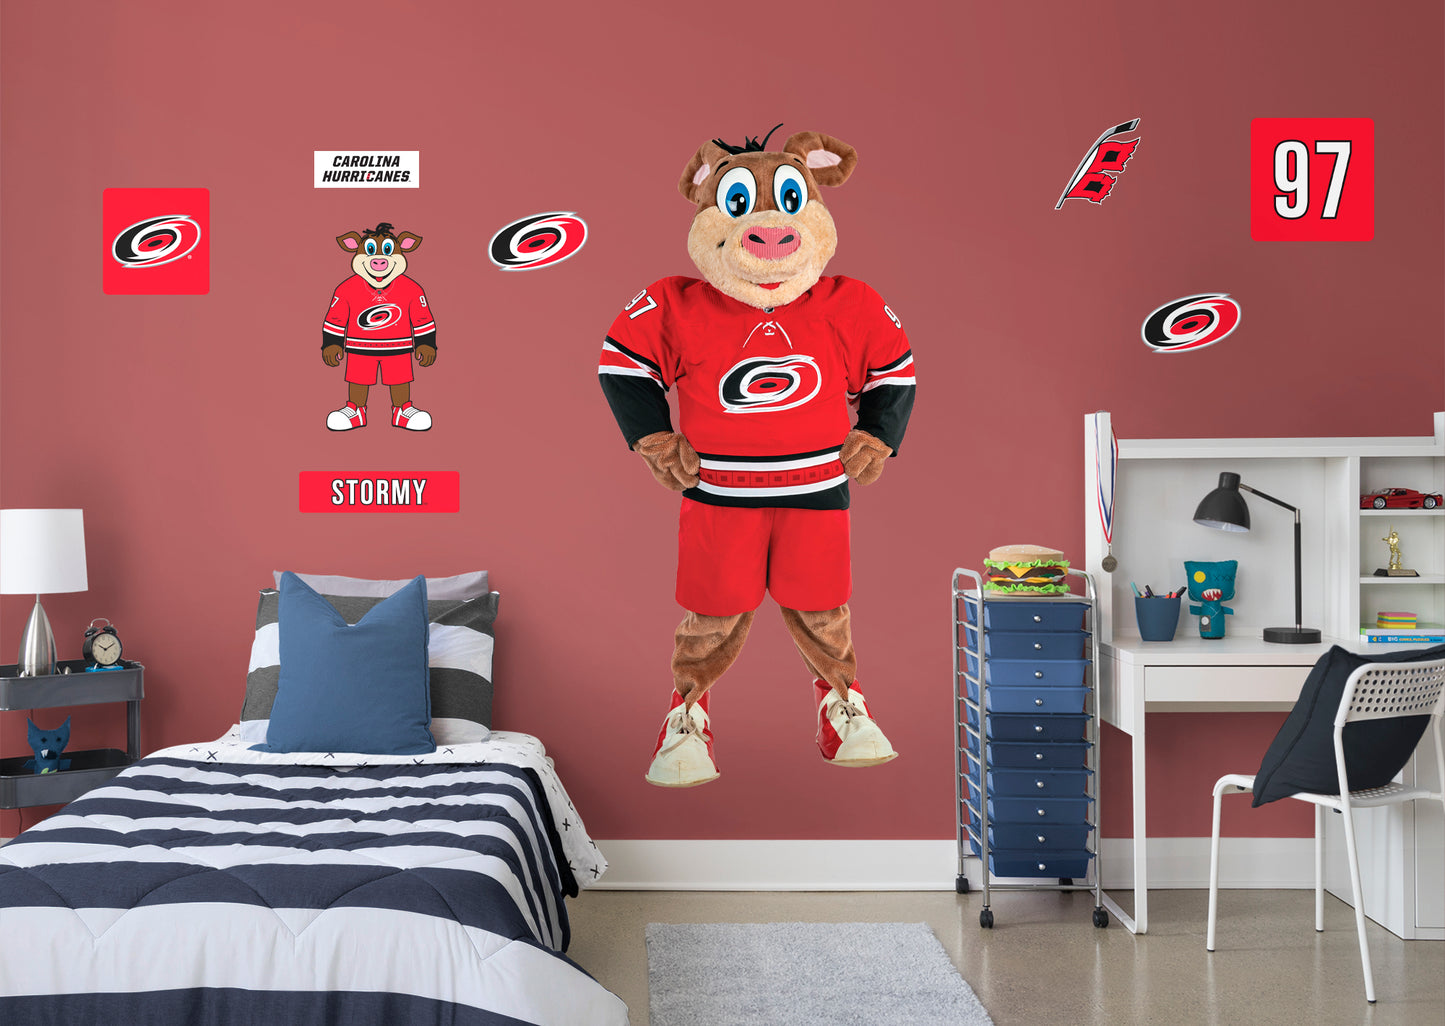 Carolina Hurricanes: Stormy 2021 Mascot        - Officially Licensed NHL Removable Wall   Adhesive Decal